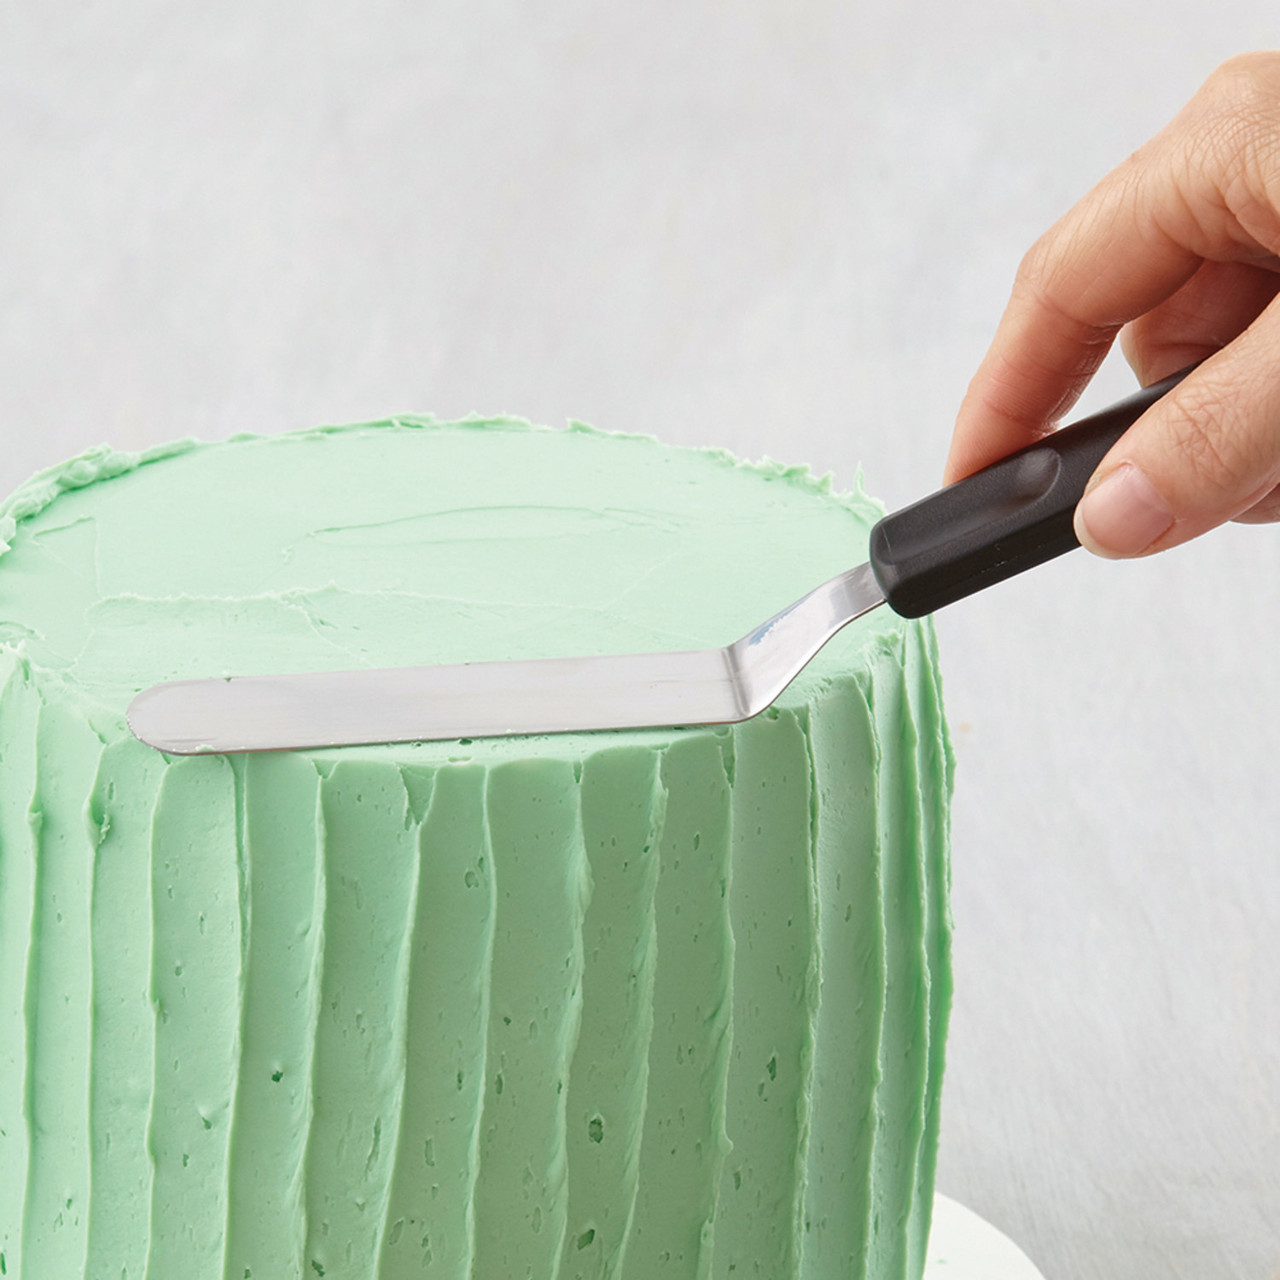 How to Spatula Paint with Icing - Wilton